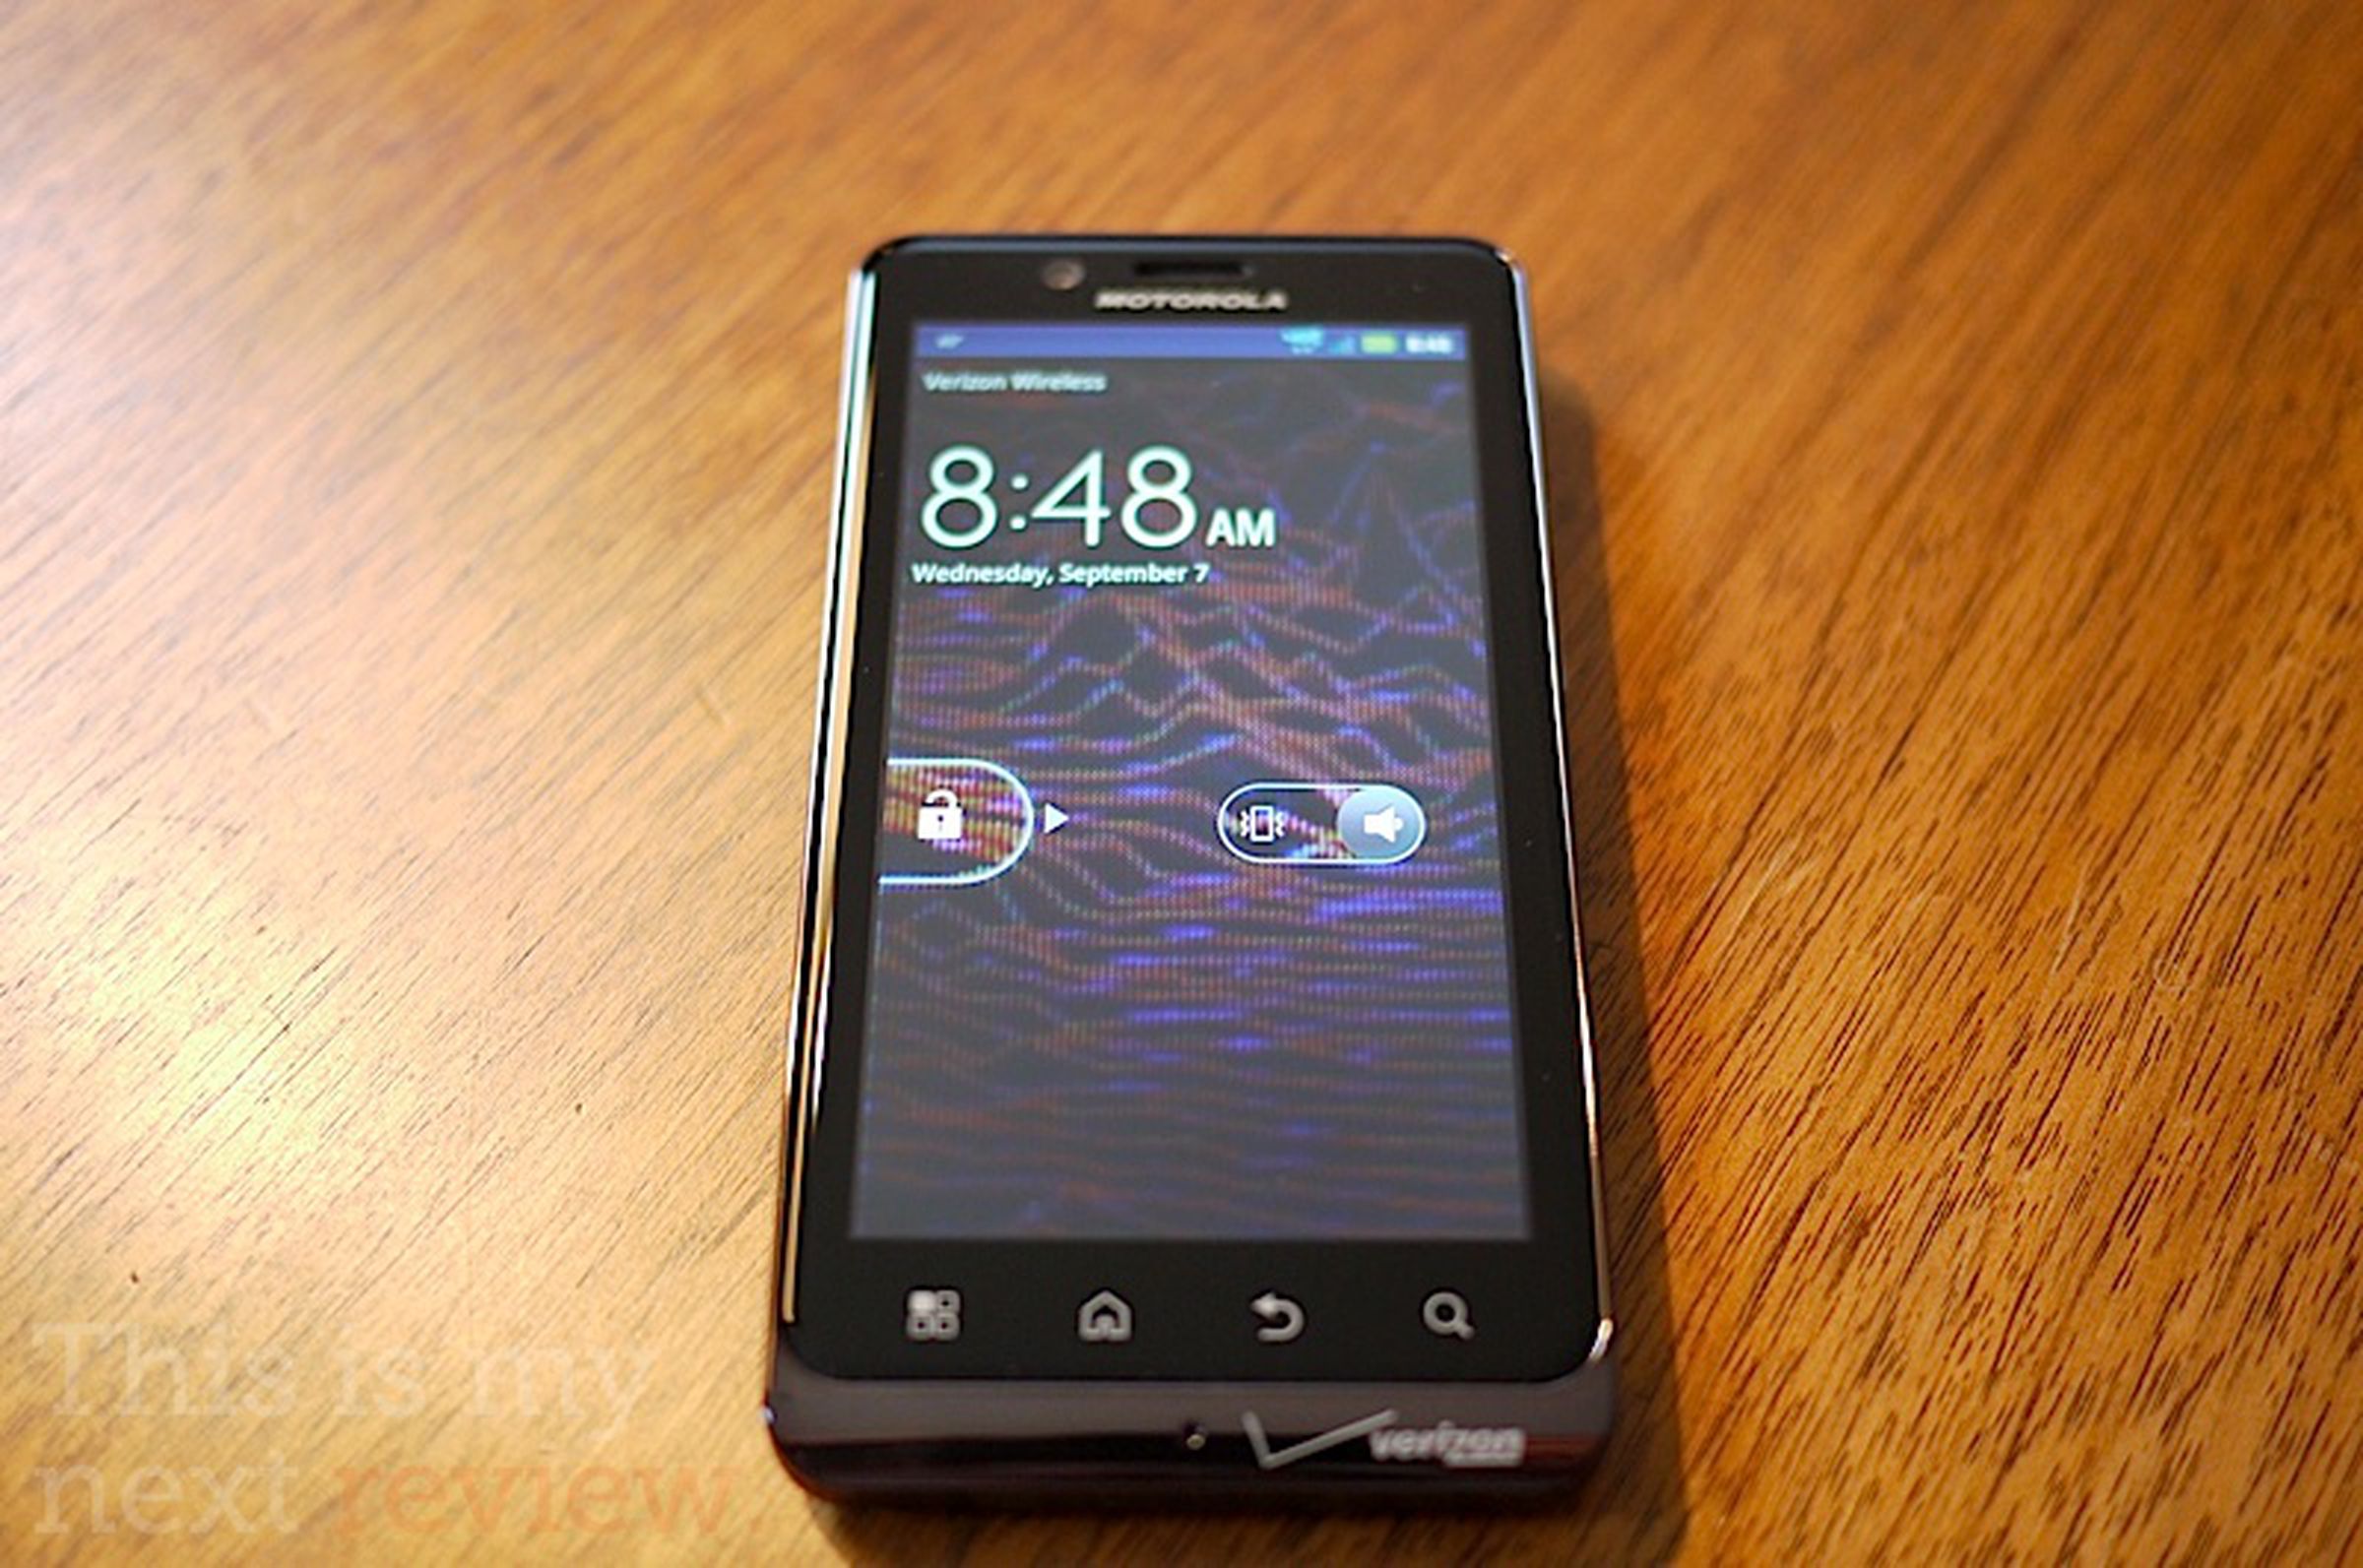 Droid Bionic review